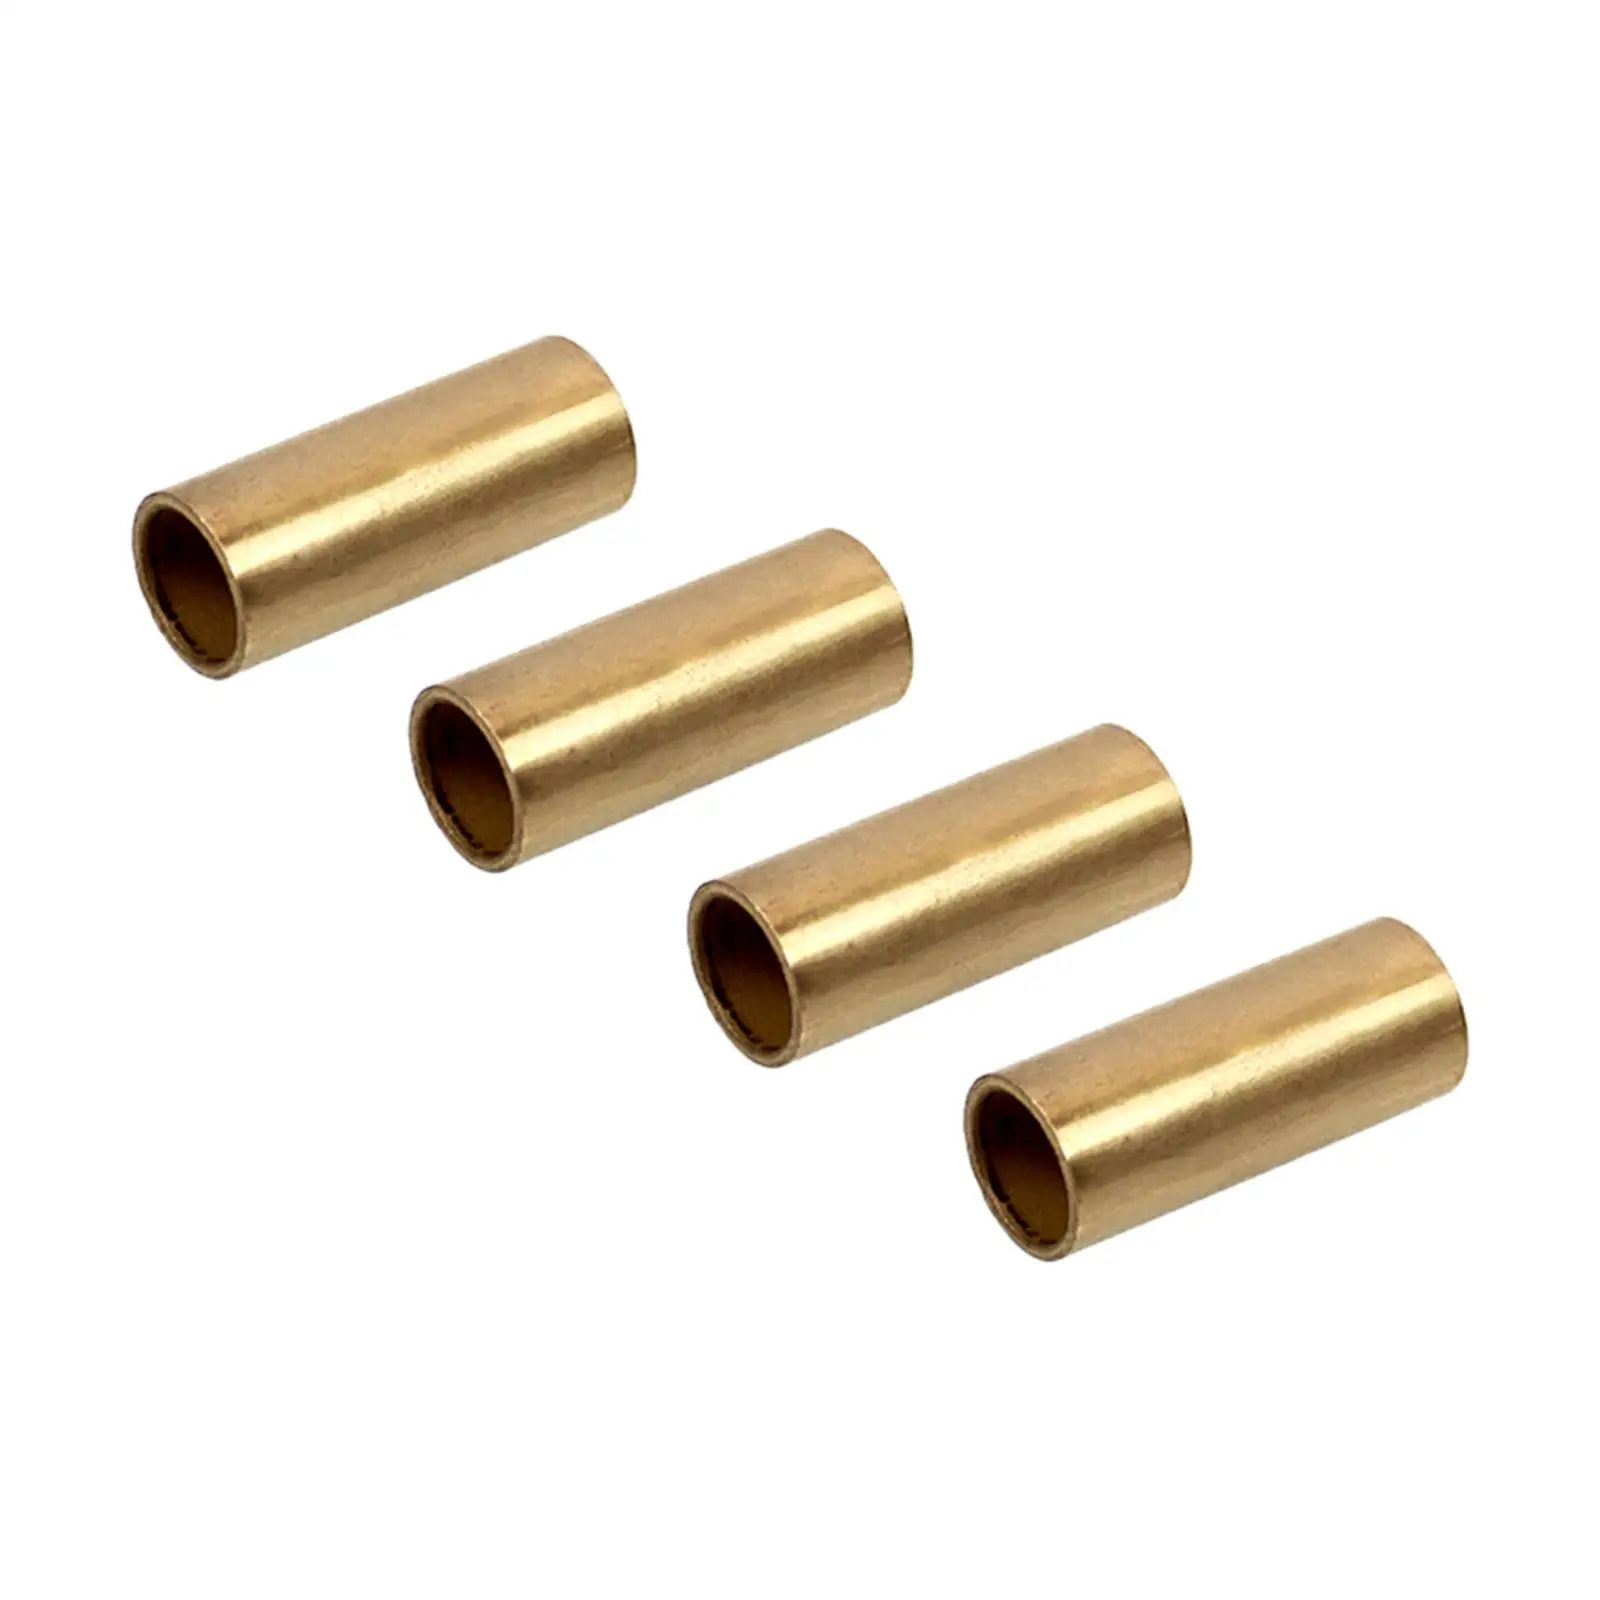 

4x Bronze Leaf Spring Shackle Bushings K71-291-00 Direct Replaces Strong Parts Easy to Install Professional for Dexter Axle